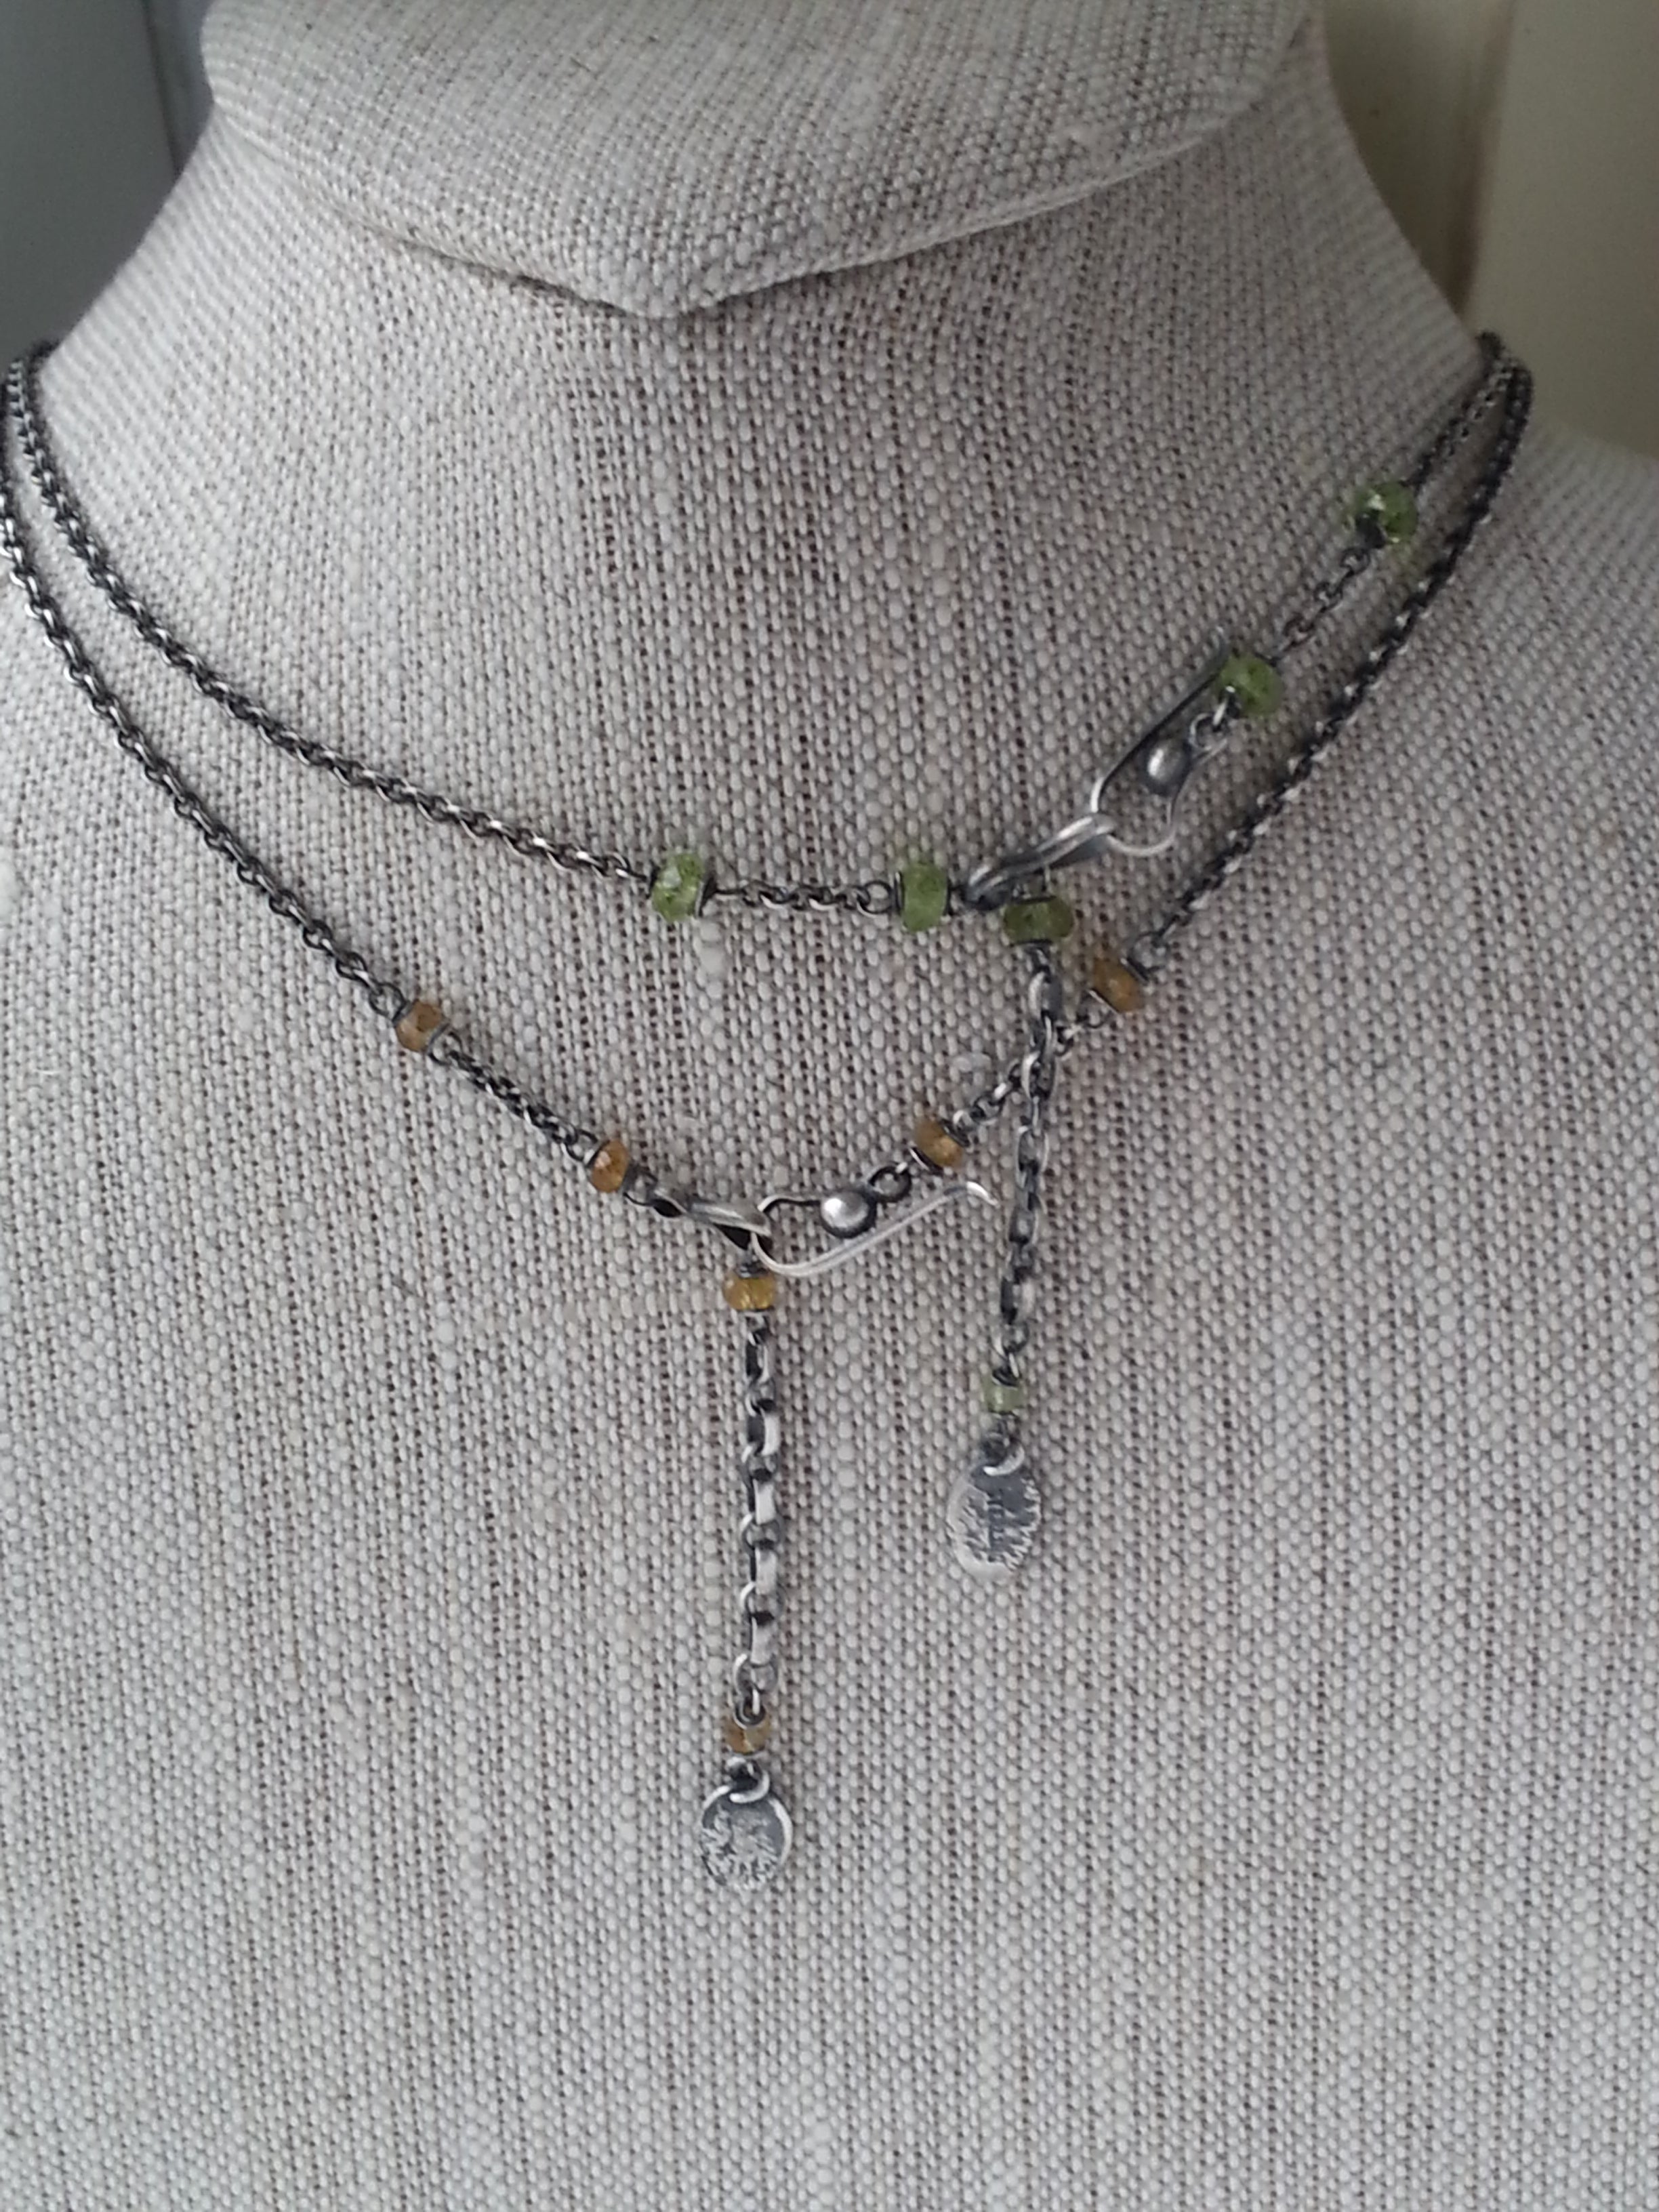 1" Chain Extender in Peridot and showing Citrine